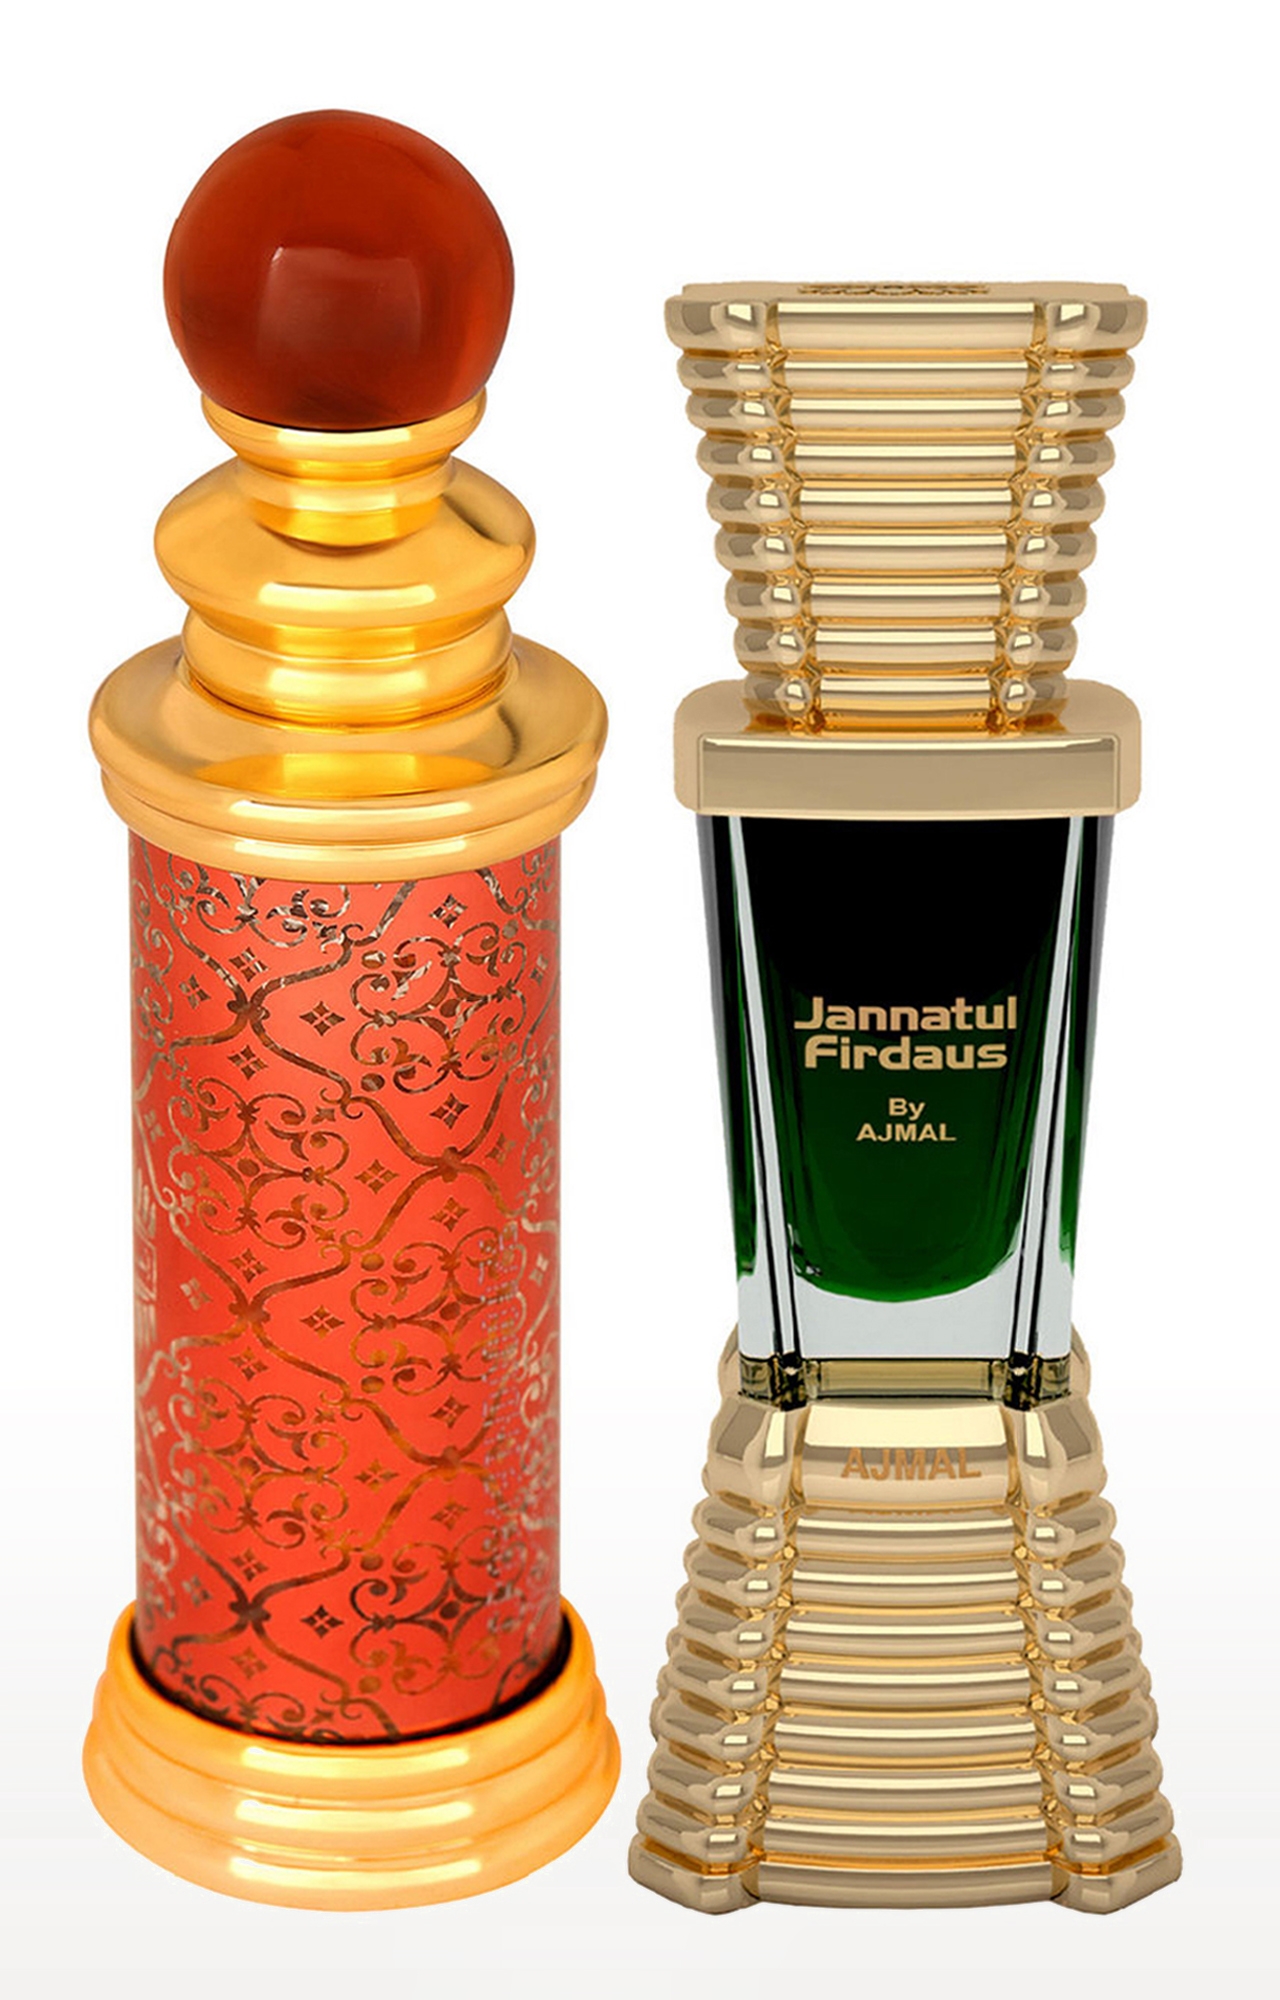 Ajmal Classic Oud Concentrated Perfume Oil Oudh Alcohol-free Attar 10ml for Unisex and Jannatul Firdaus Concentrated Perfume Oil Oriental Alcohol-free Attar 10ml for Unisex